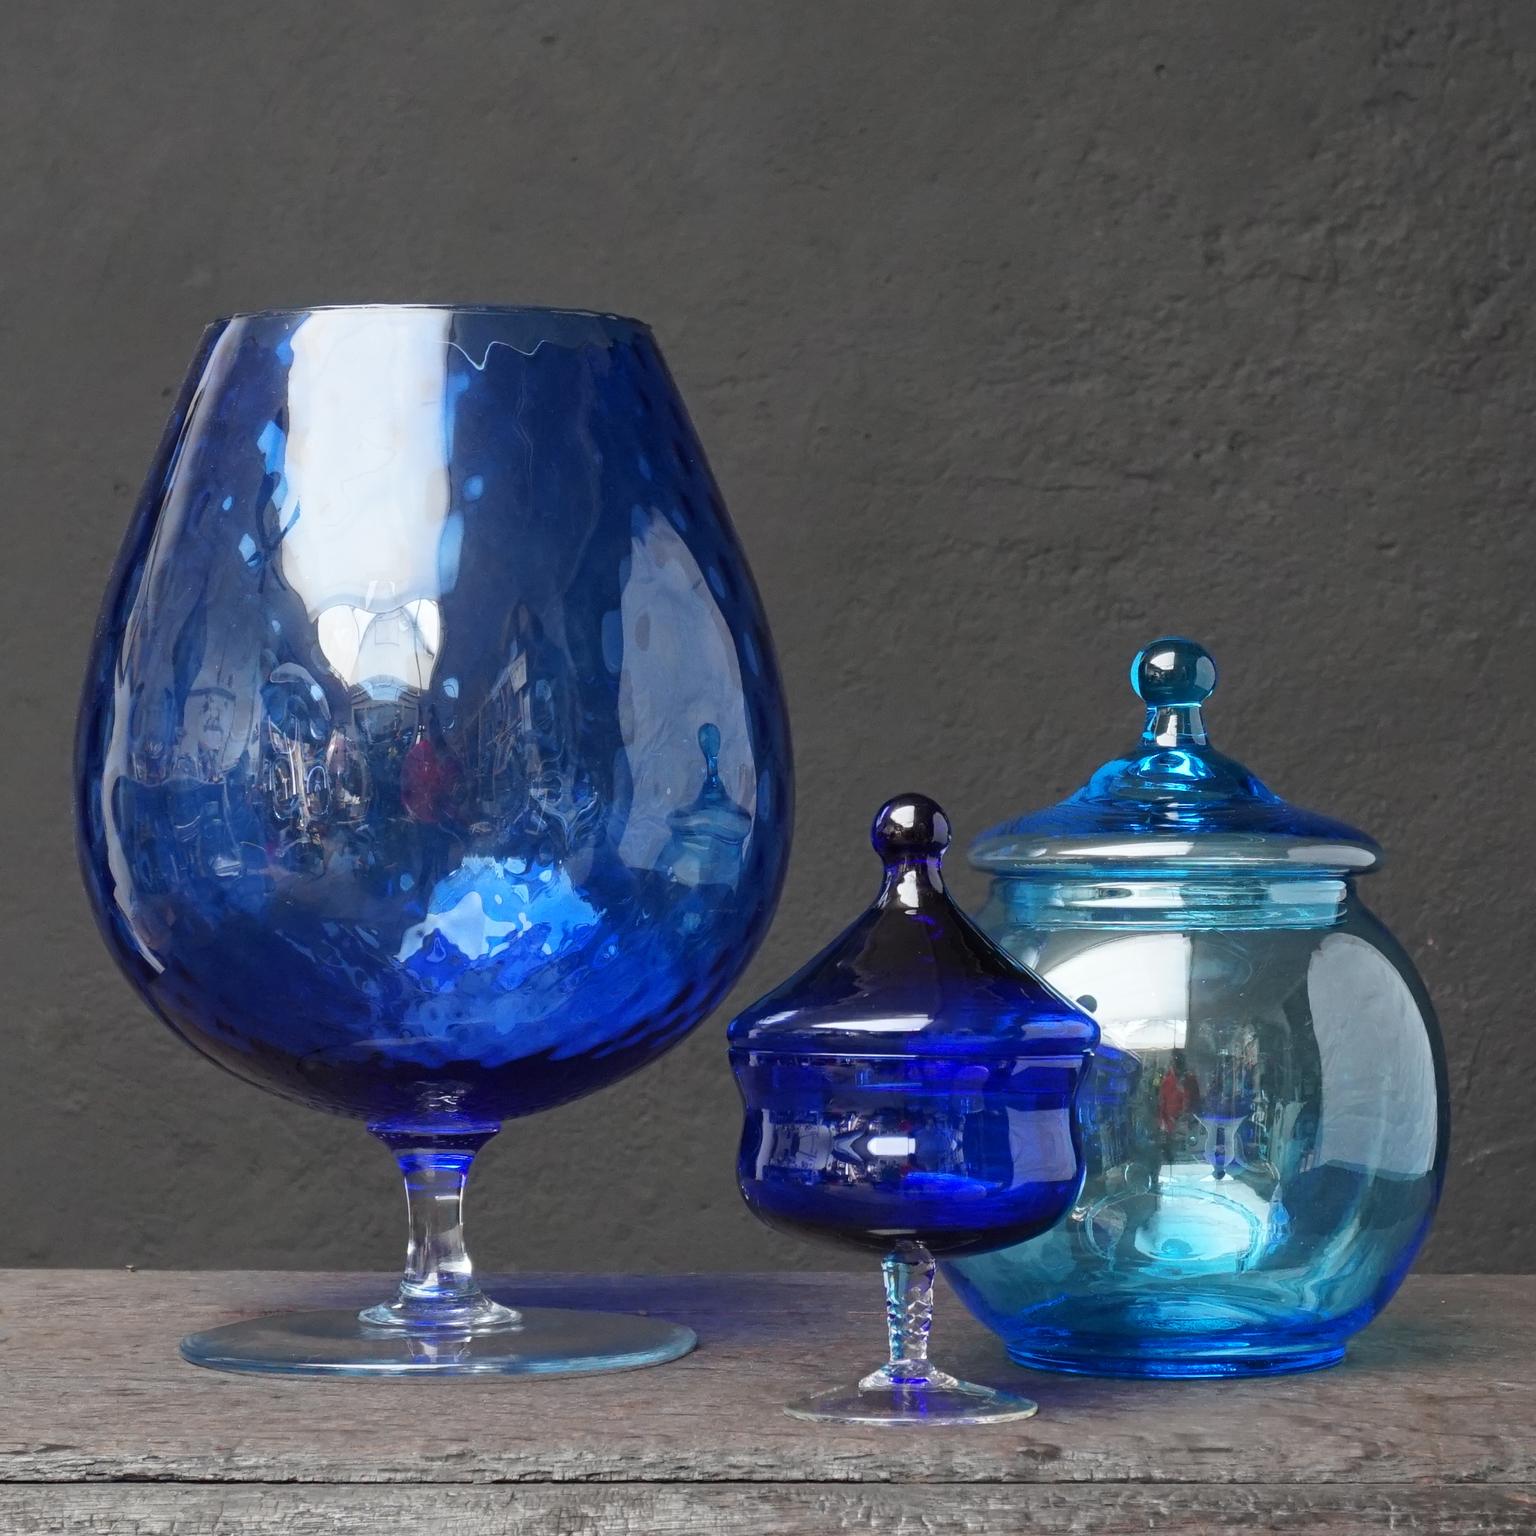 Pressed Eleven 1960s Blue Glass Italian Empoli Genie Bottles Decanters, Vases Candy Jars